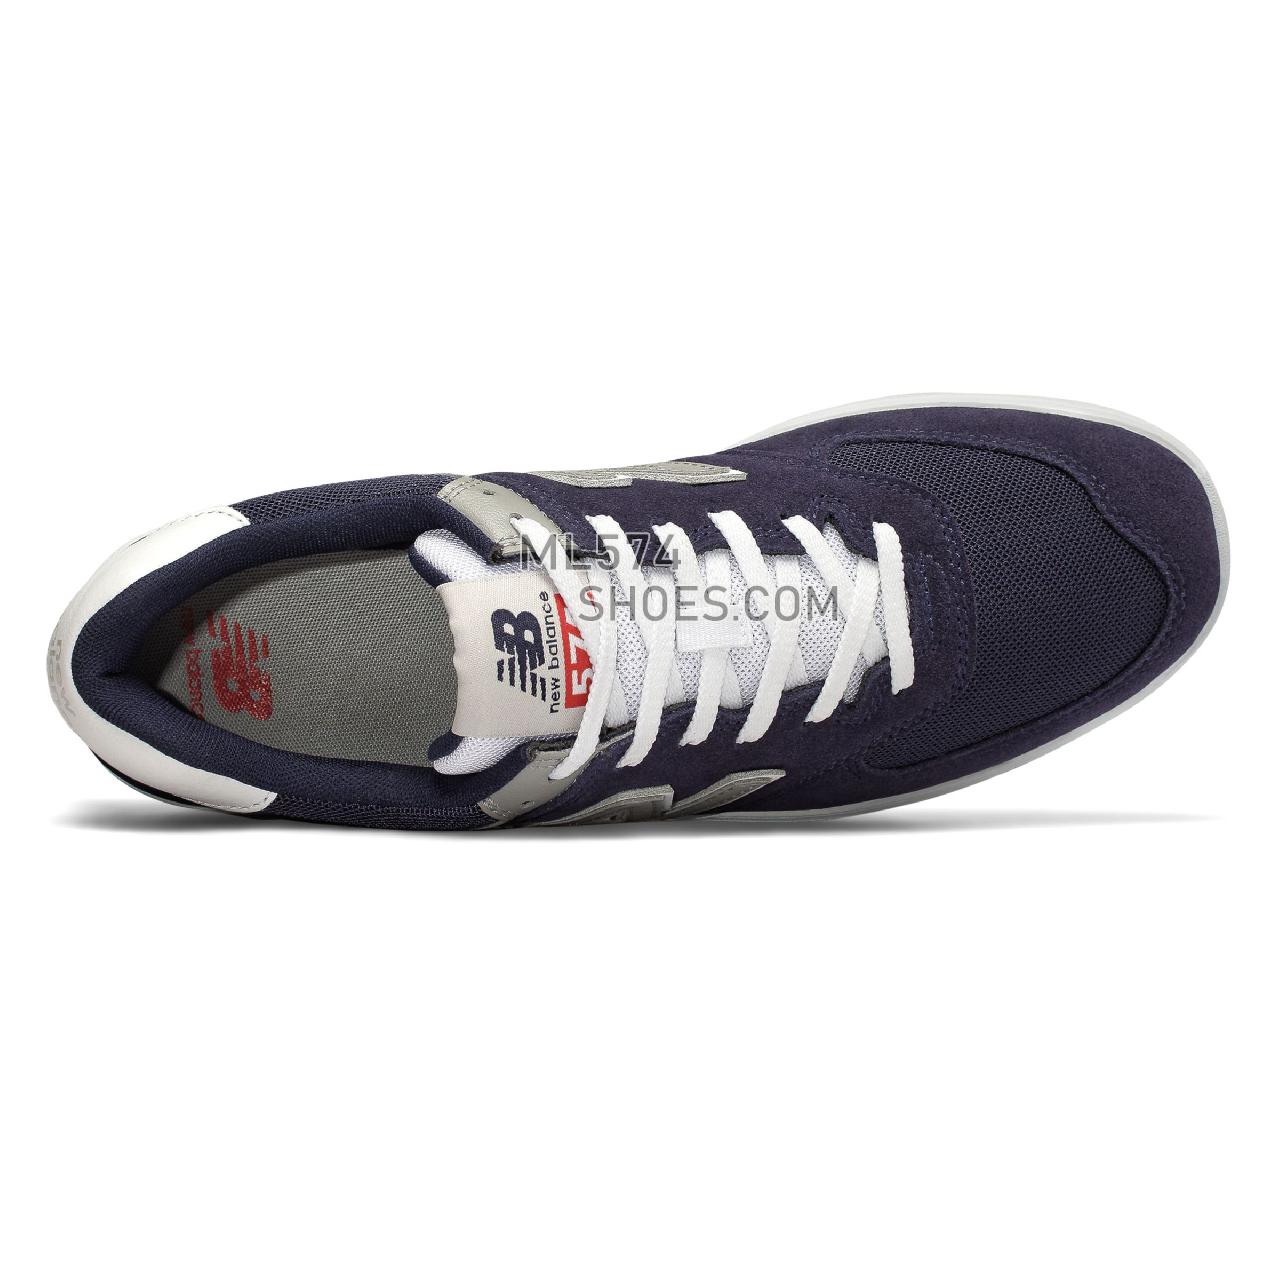 New Balance AM574 - Men's Court Classics - Navy with White - AM574NYR